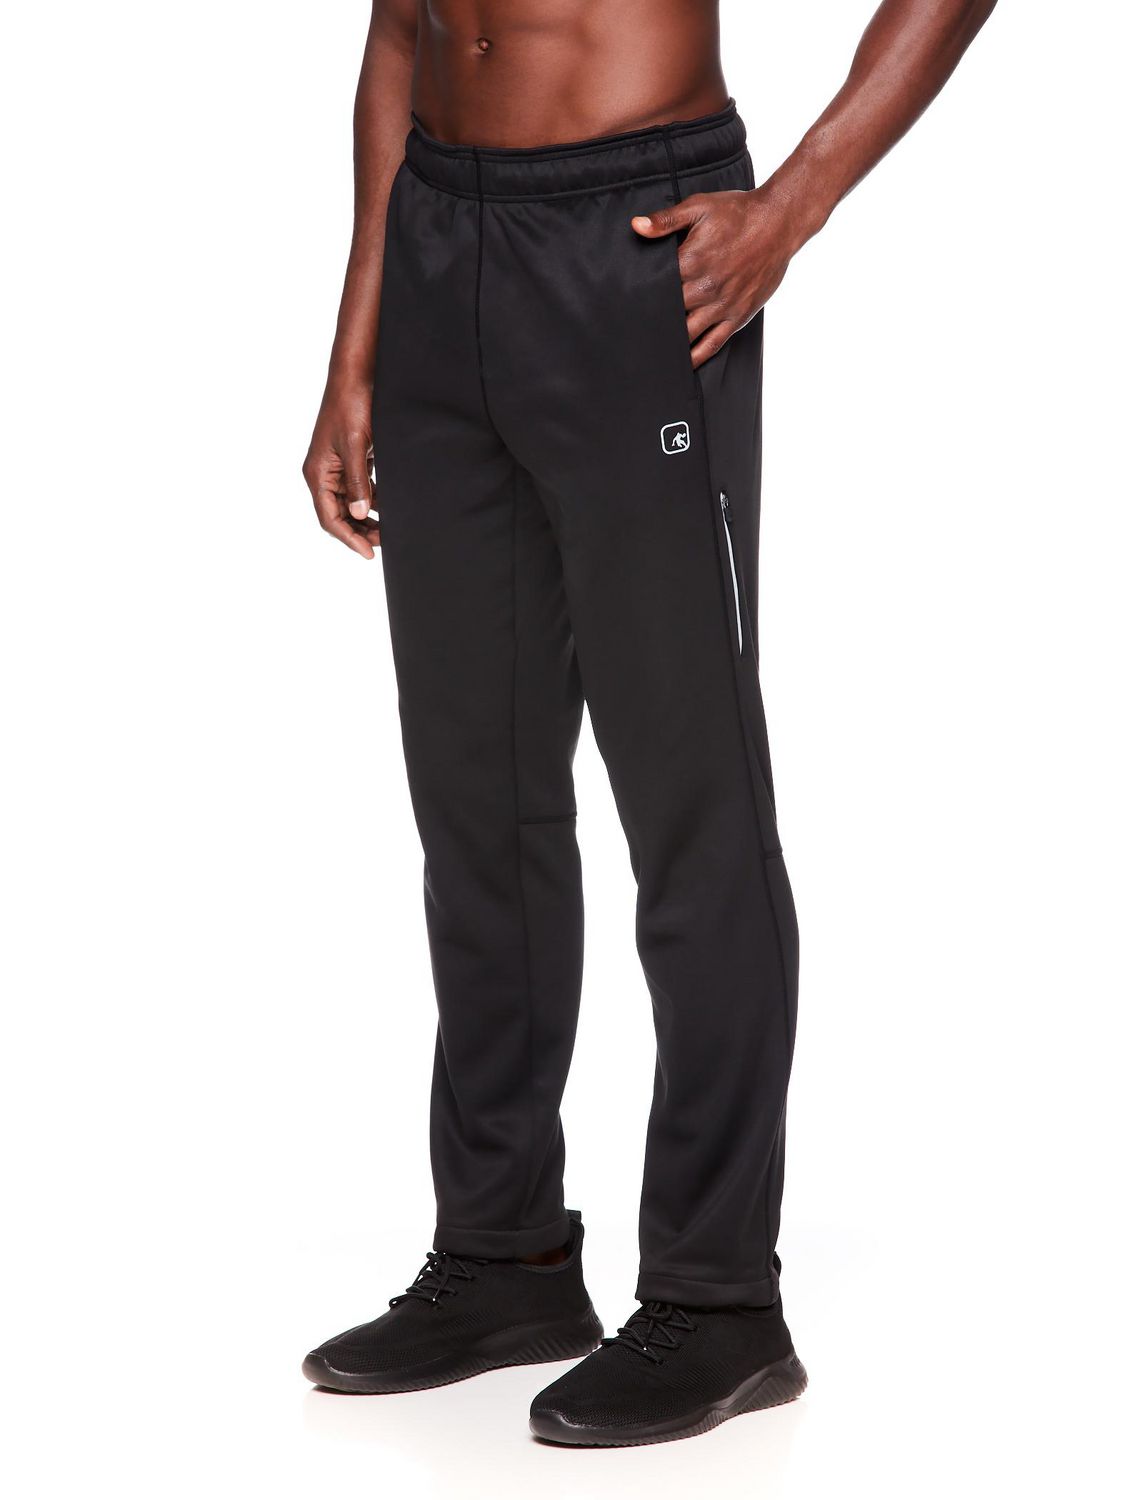 AND1 Men's Speed Cut Bball Pants, Sizes S-XL 